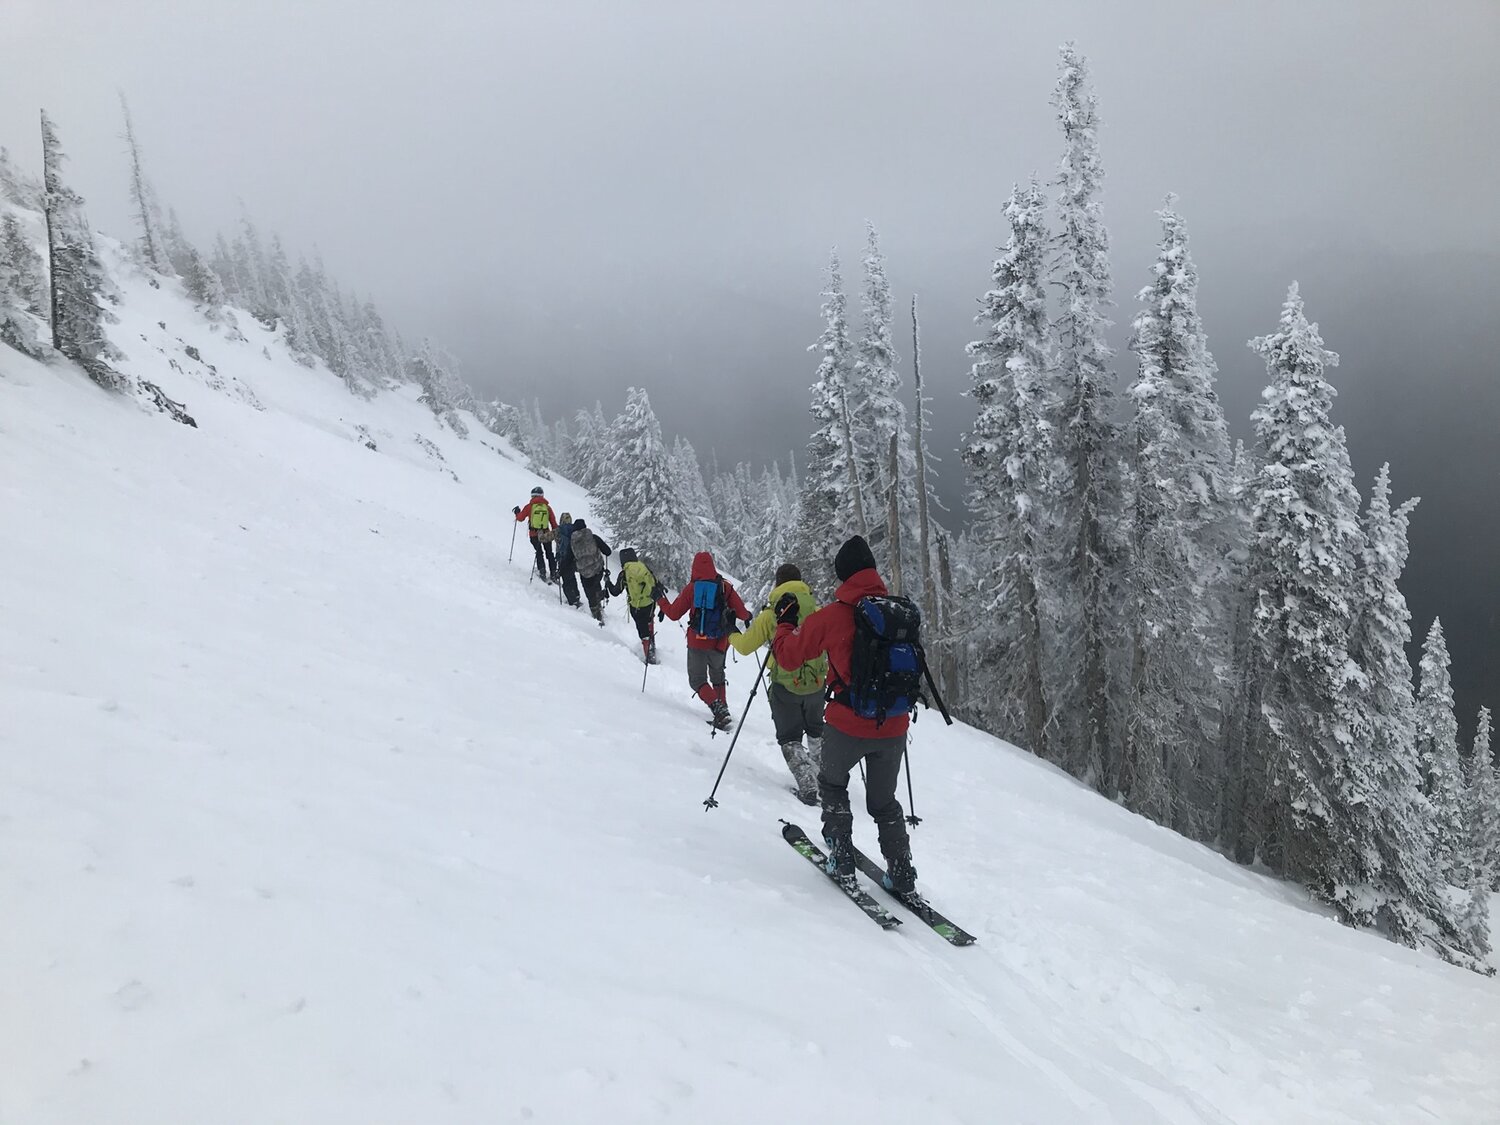 JSAR volunteers head out to practice winter SAR training in March 2021 in Olympic National Park. Every year the team practices avalanche awareness and search skills as well as patient-packaging in winter conditions.